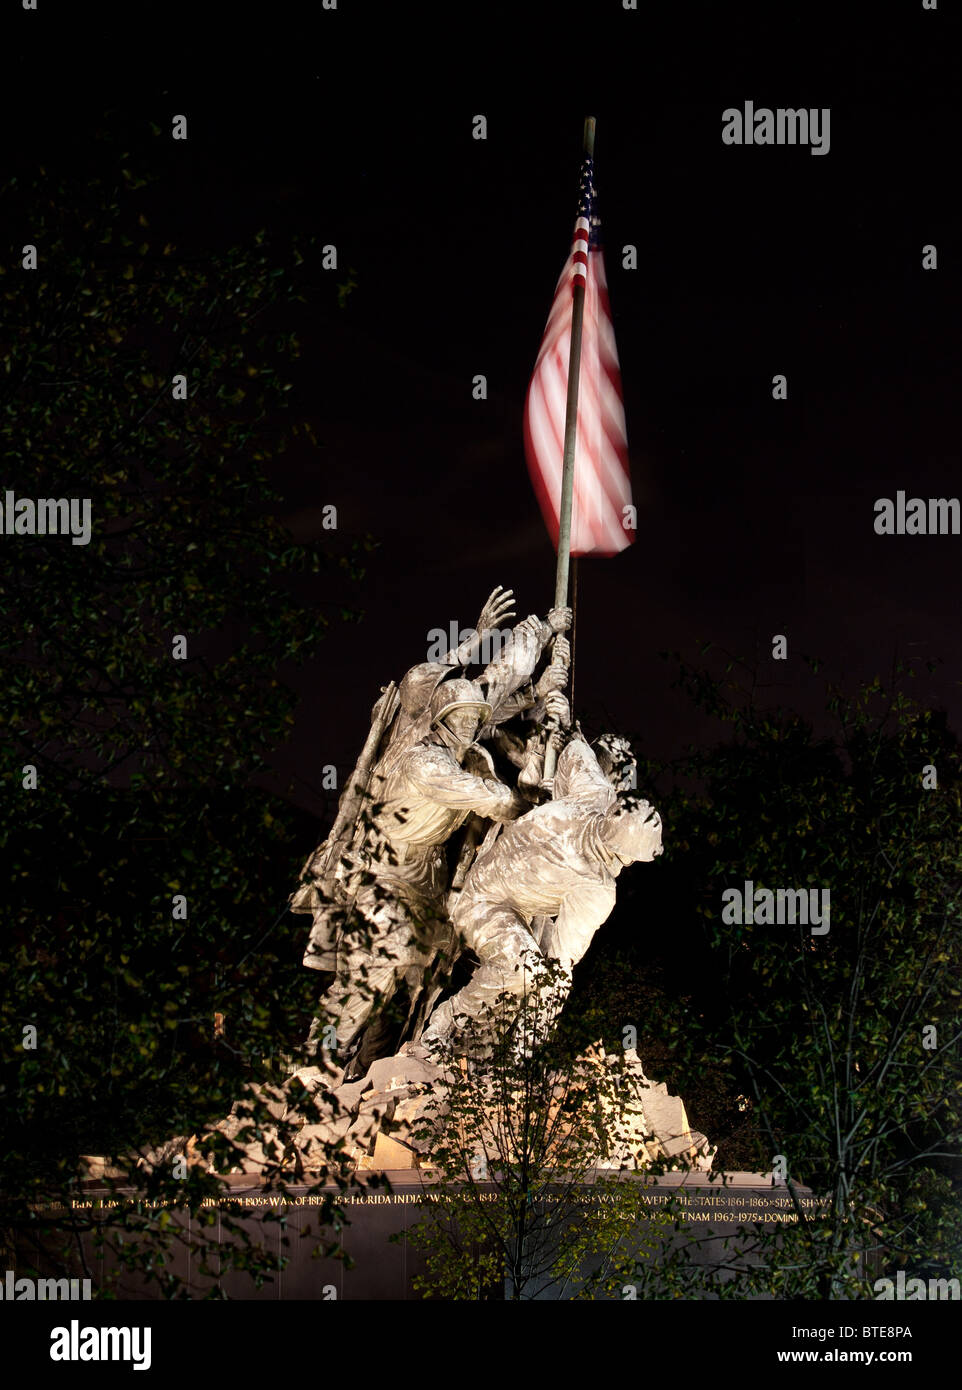 Statue commemorating Iwo Jima at night lit by floodlights and seen through the trees and branches Stock Photo